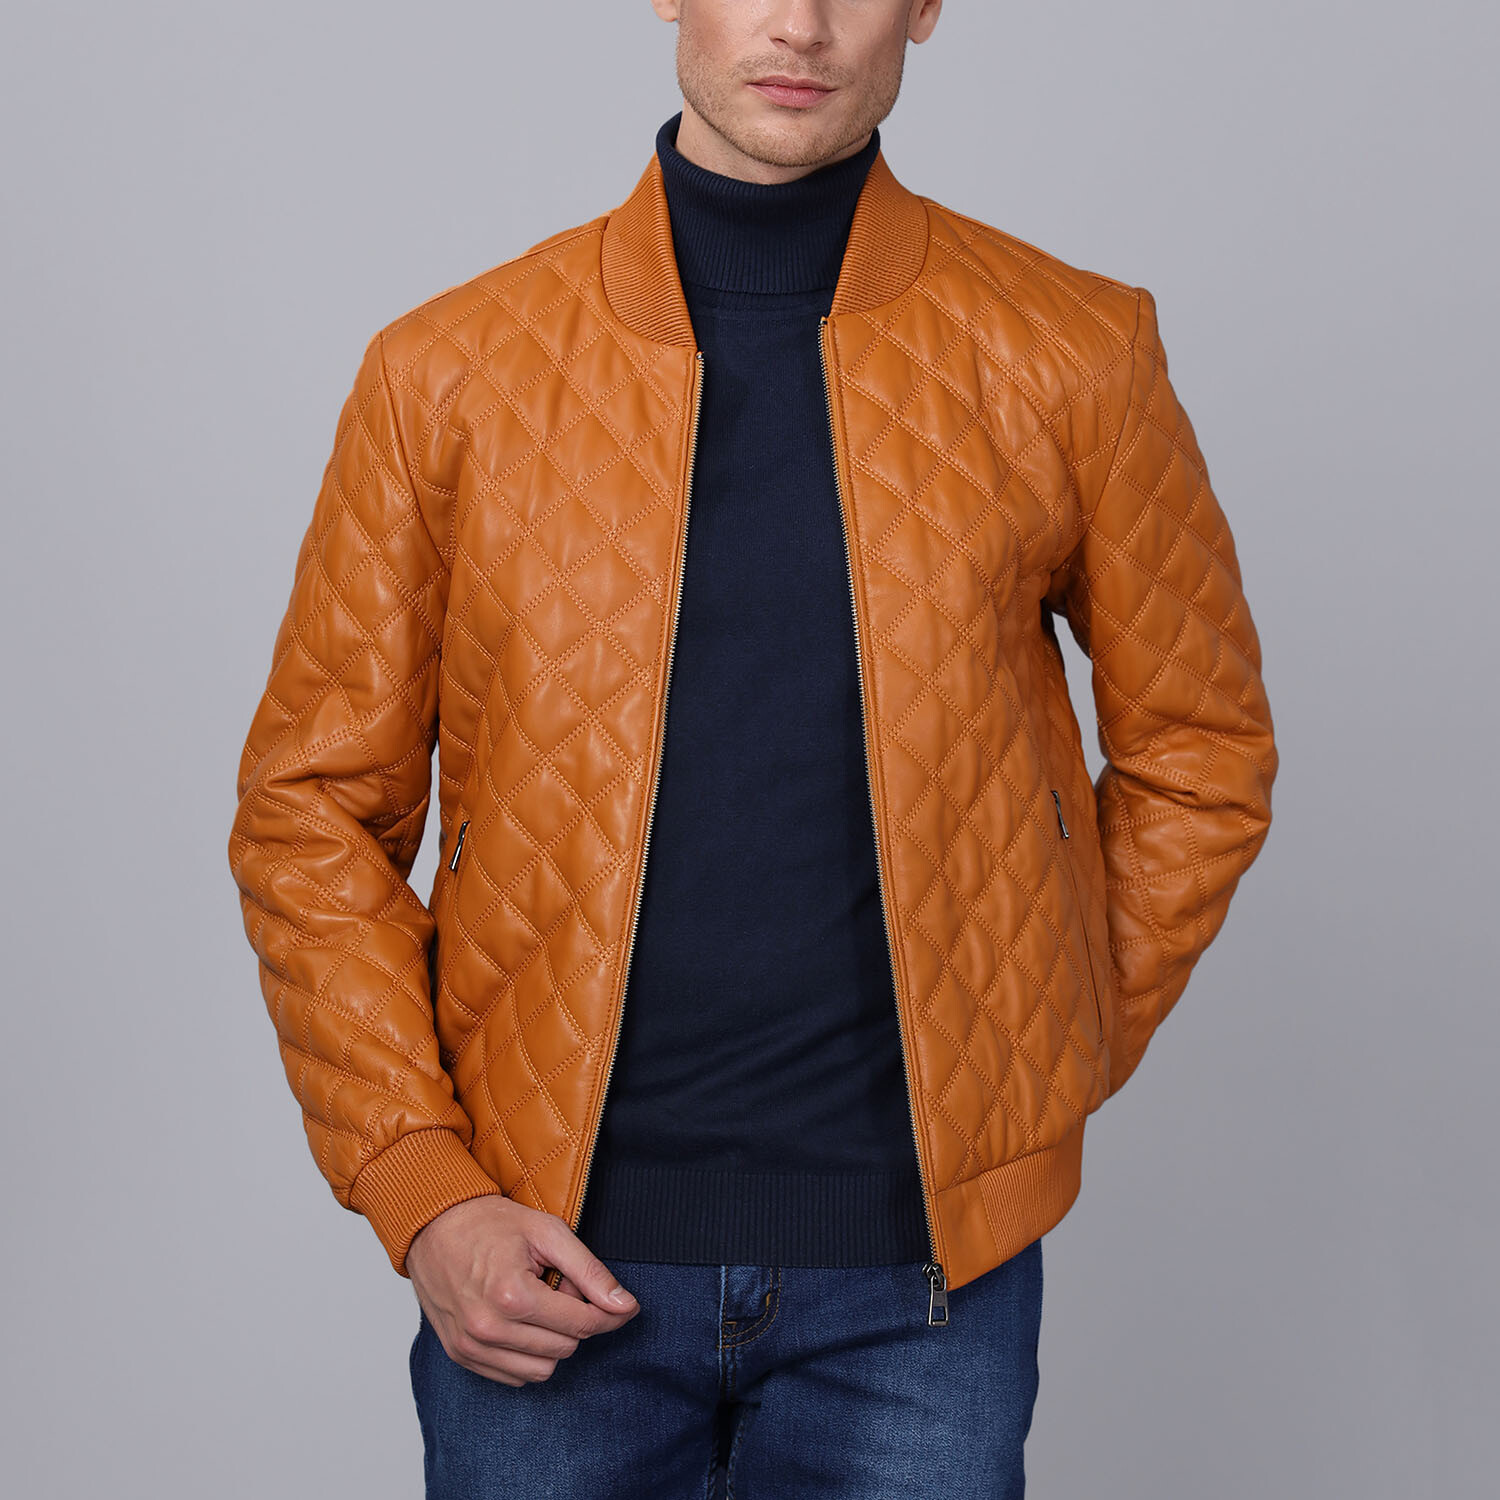 Pat Leather Jacket // Camel (2XL) - Basics&More PERMANENT STORE - Touch ...